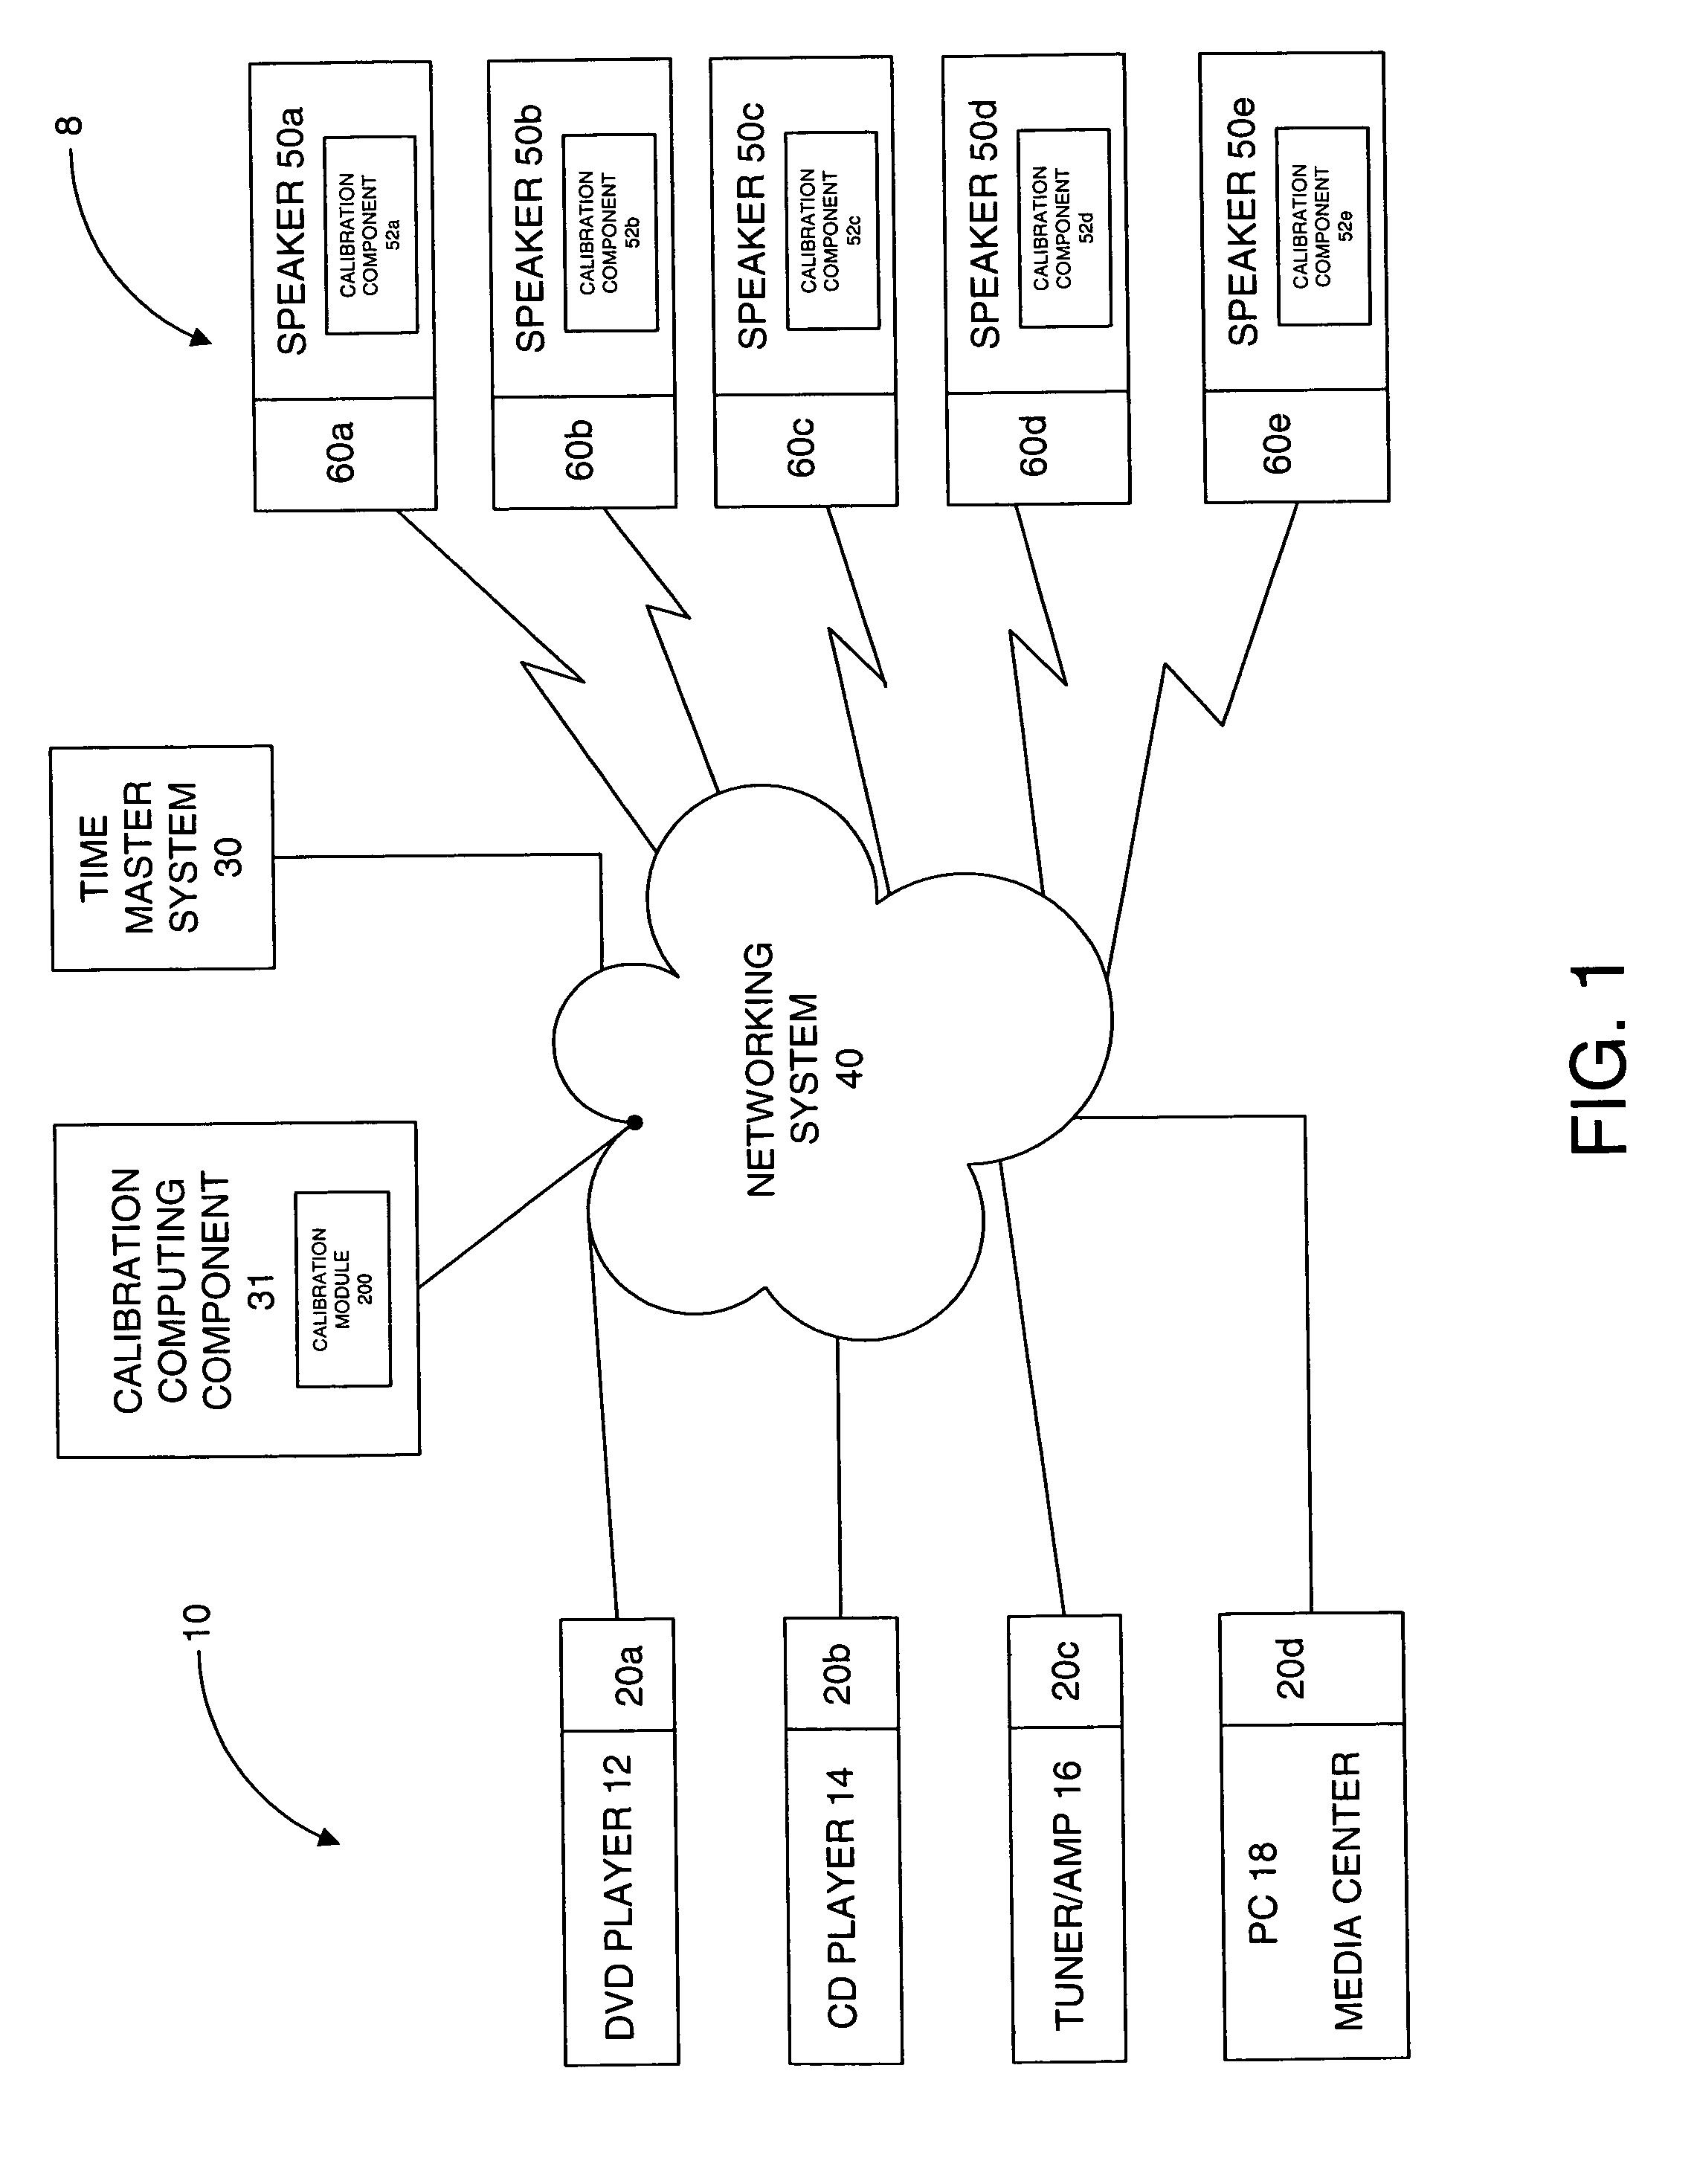 System and method for calibration of an acoustic system